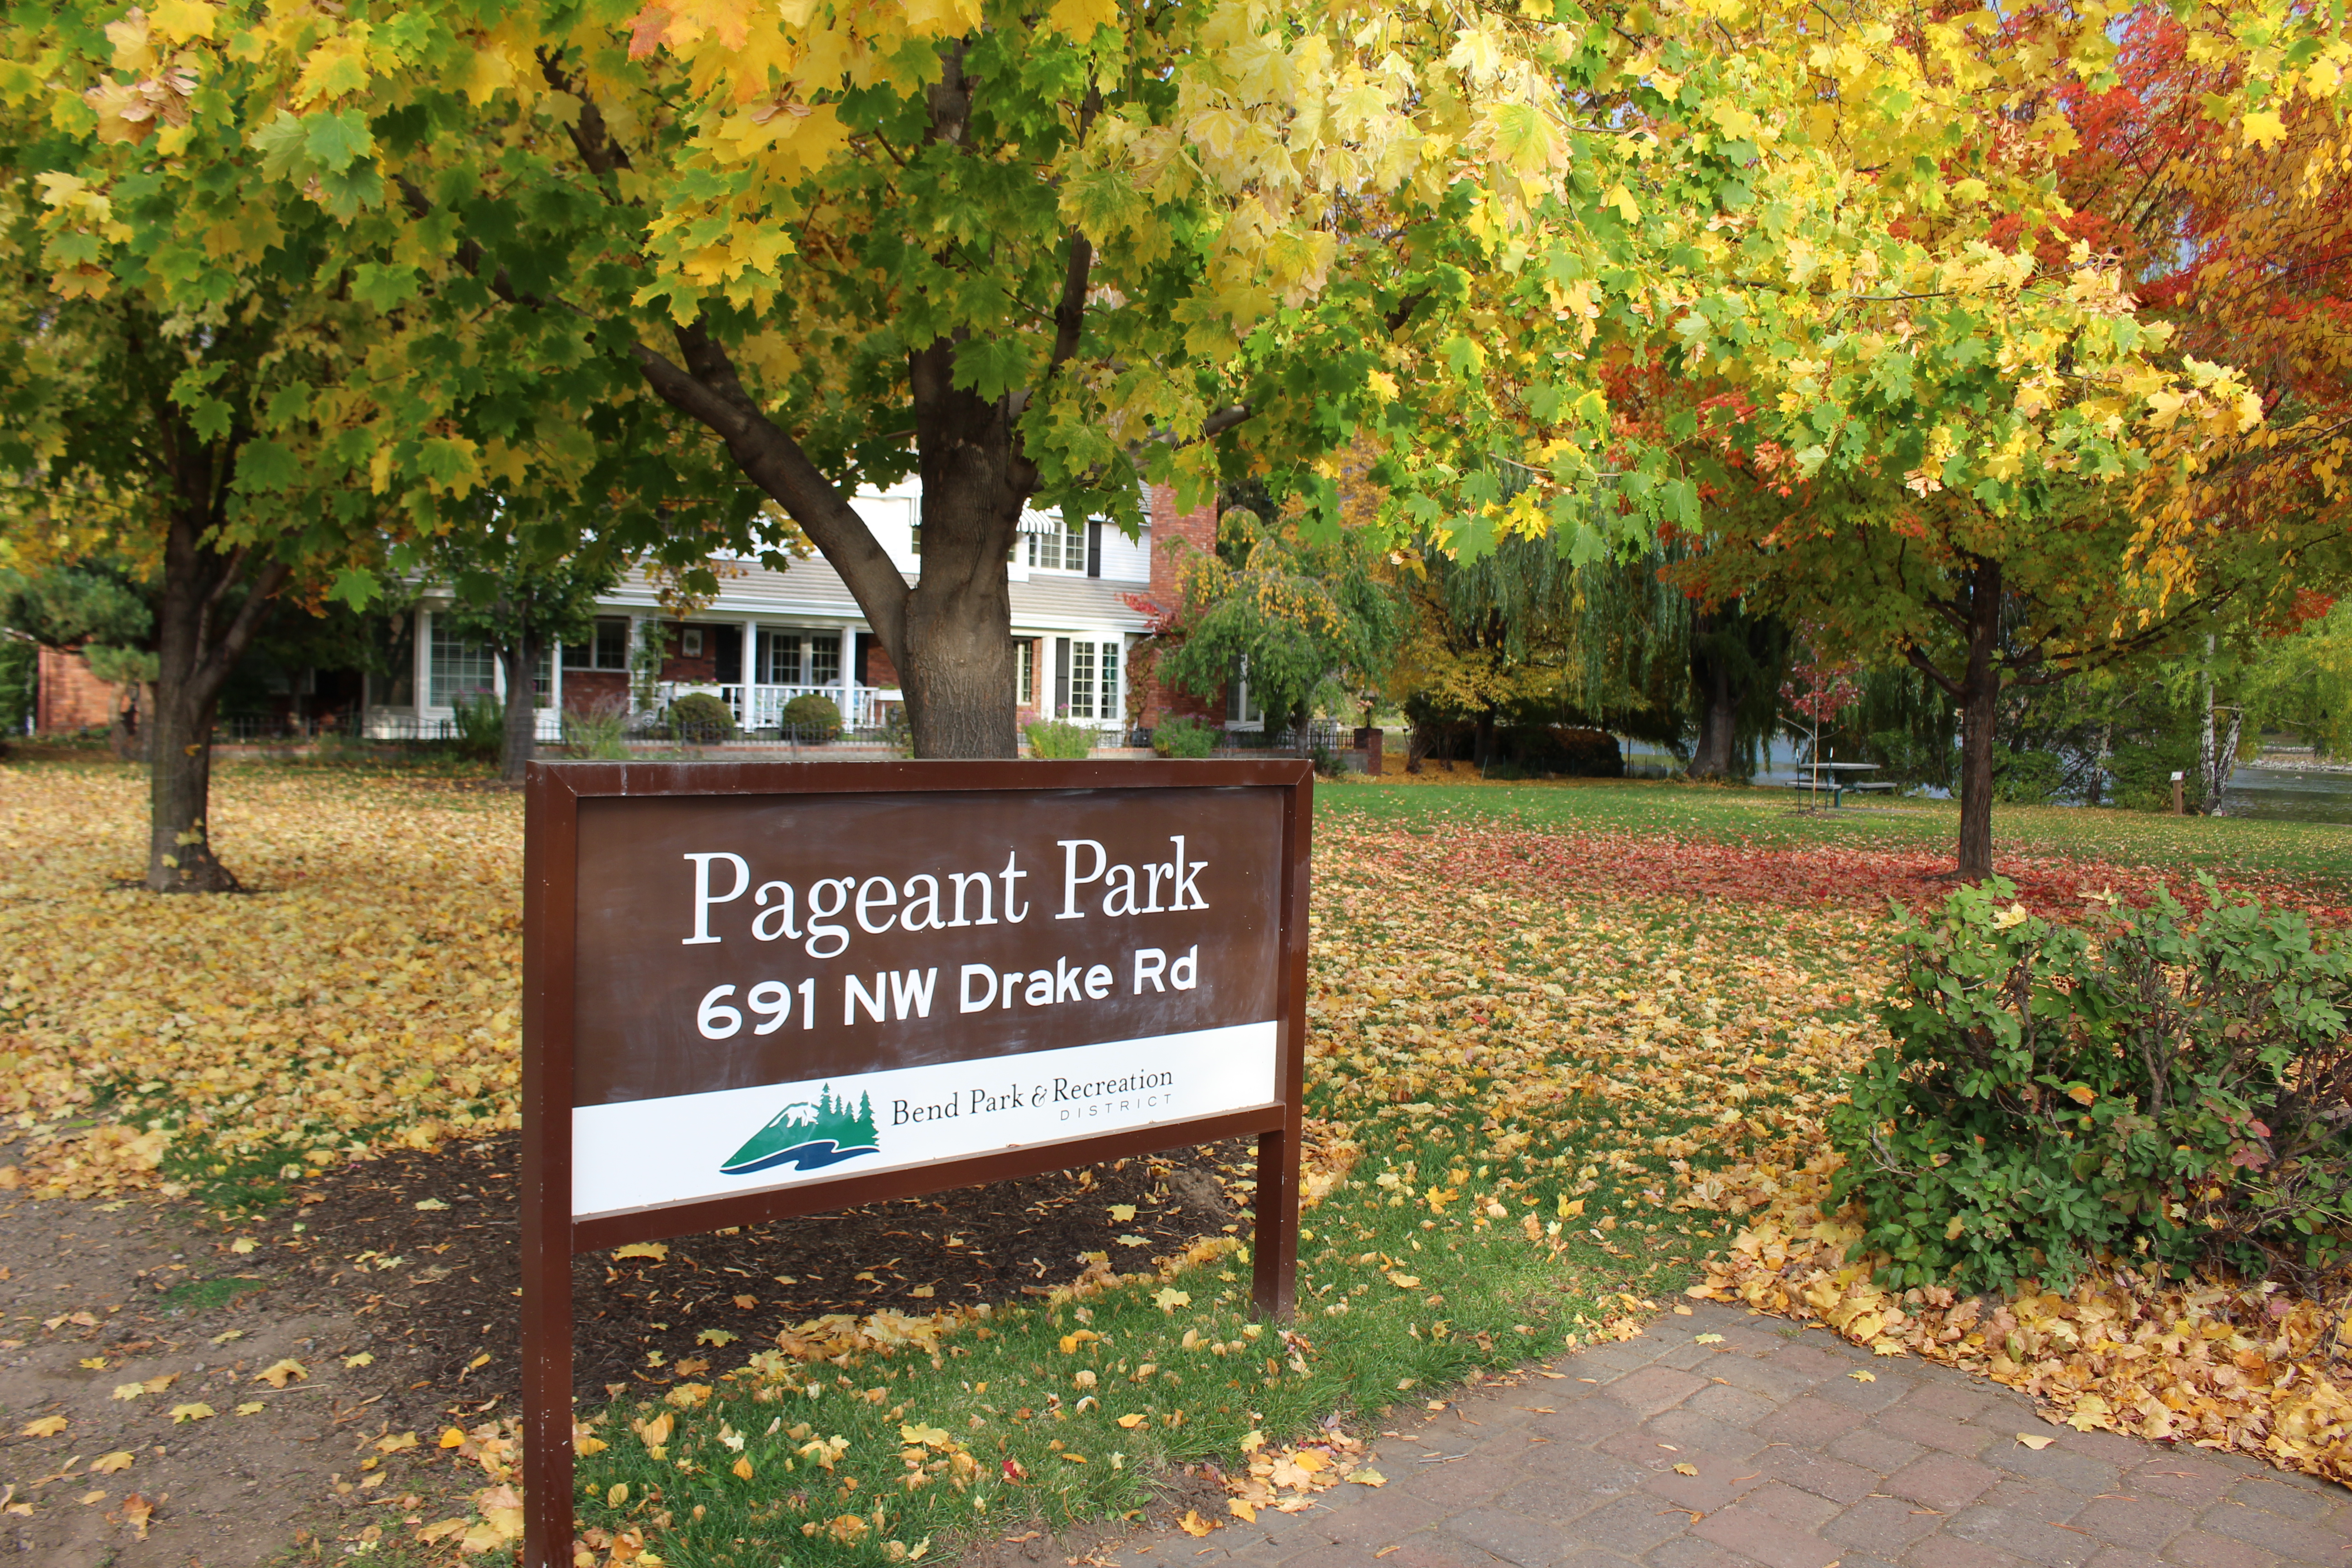 the pageant park sign